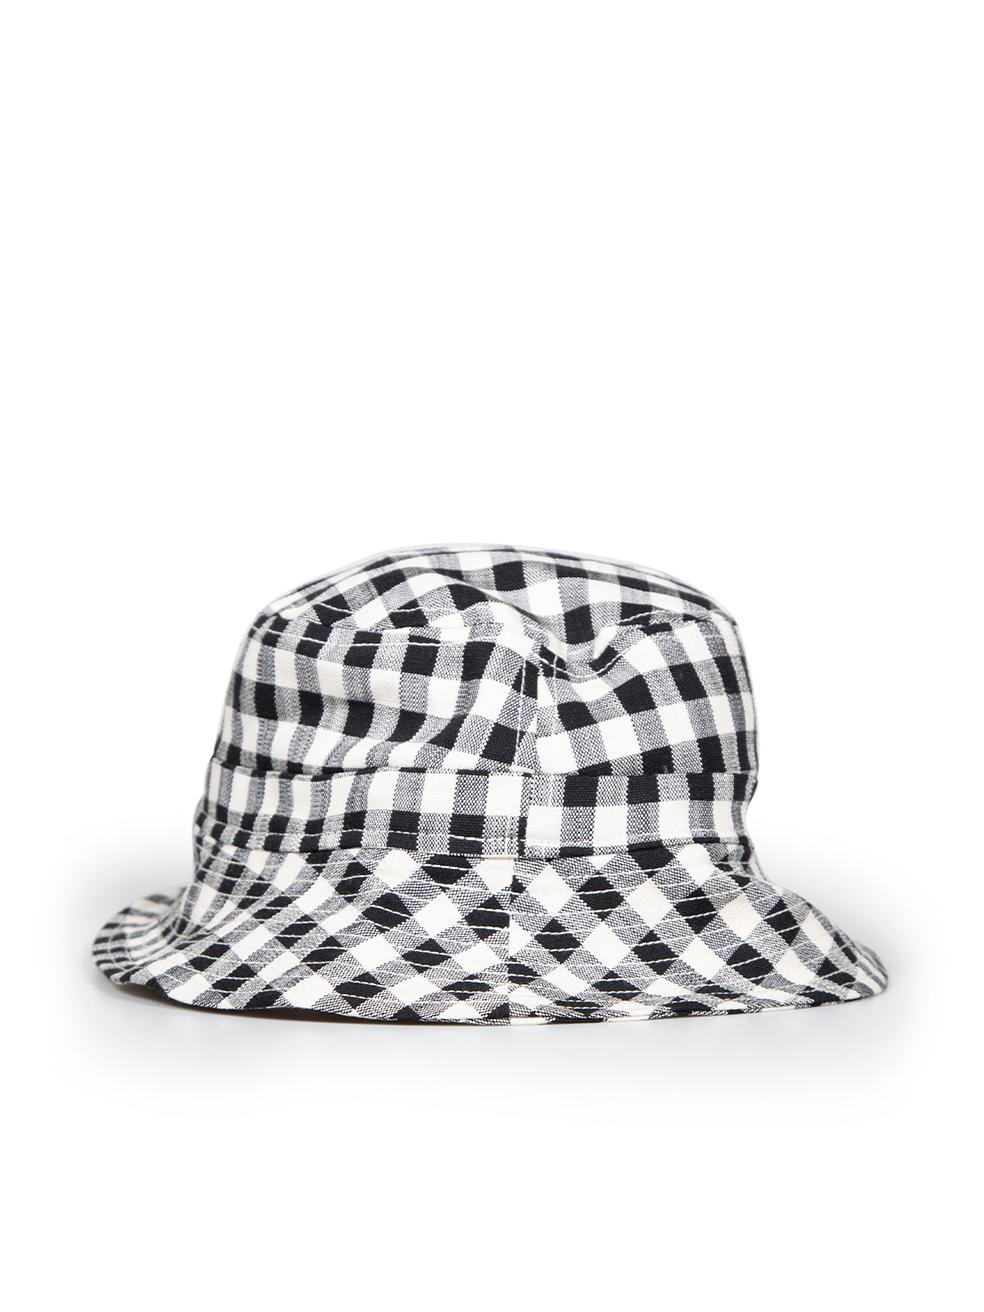 Tara Jarmon Gingham Pattern Bucket Hat In Good Condition For Sale In London, GB